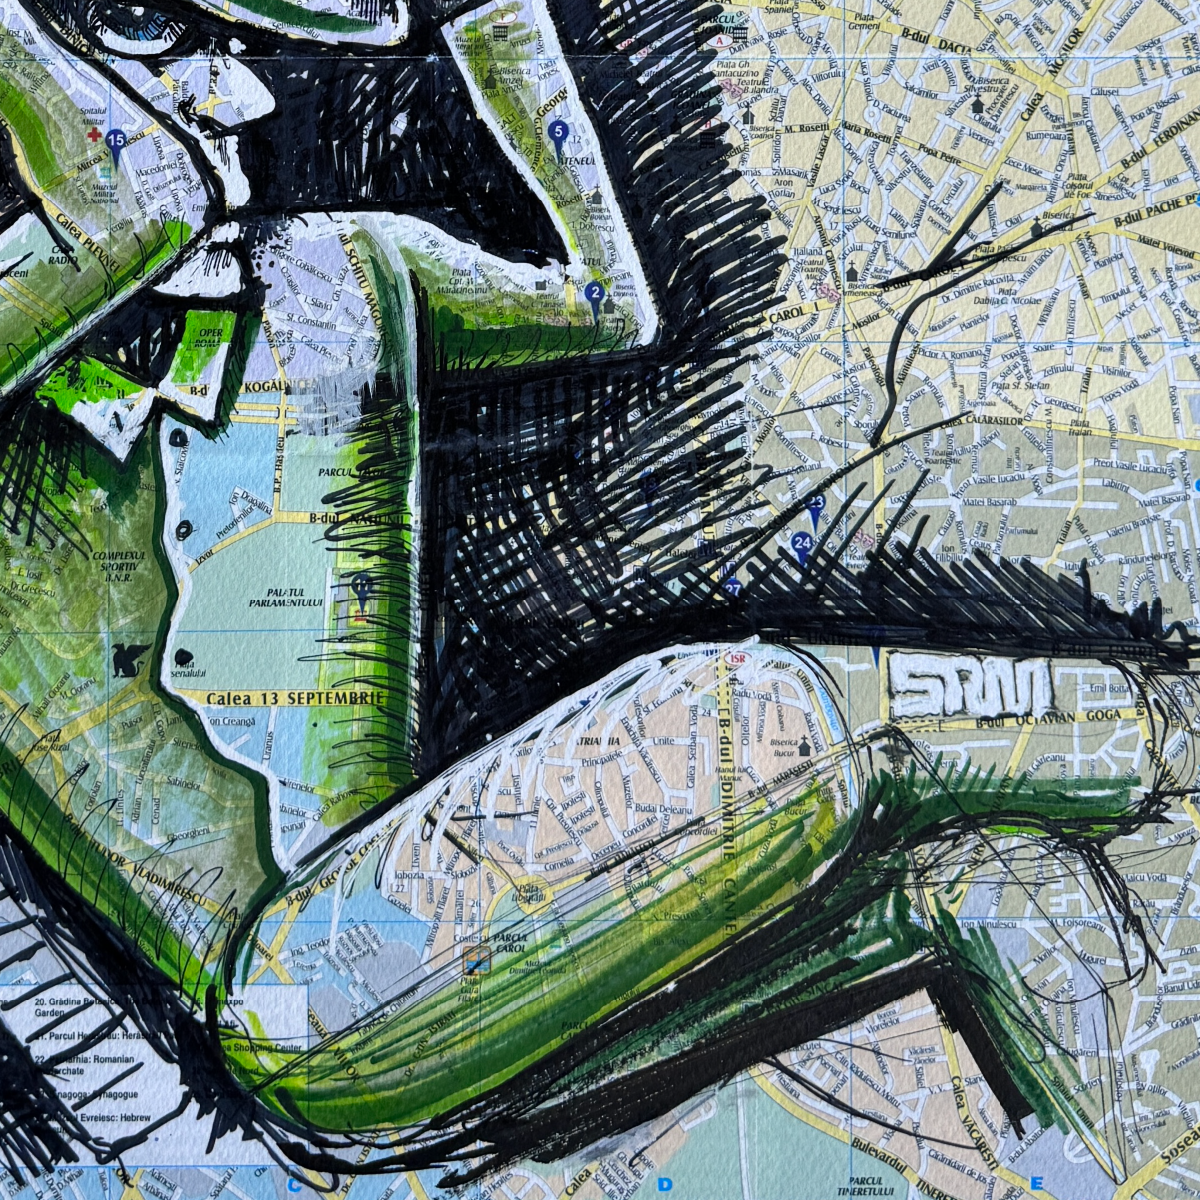 close-up, cropped view of map of bucharest, romania featuring painting of a man - bottom right featuring artist's signature